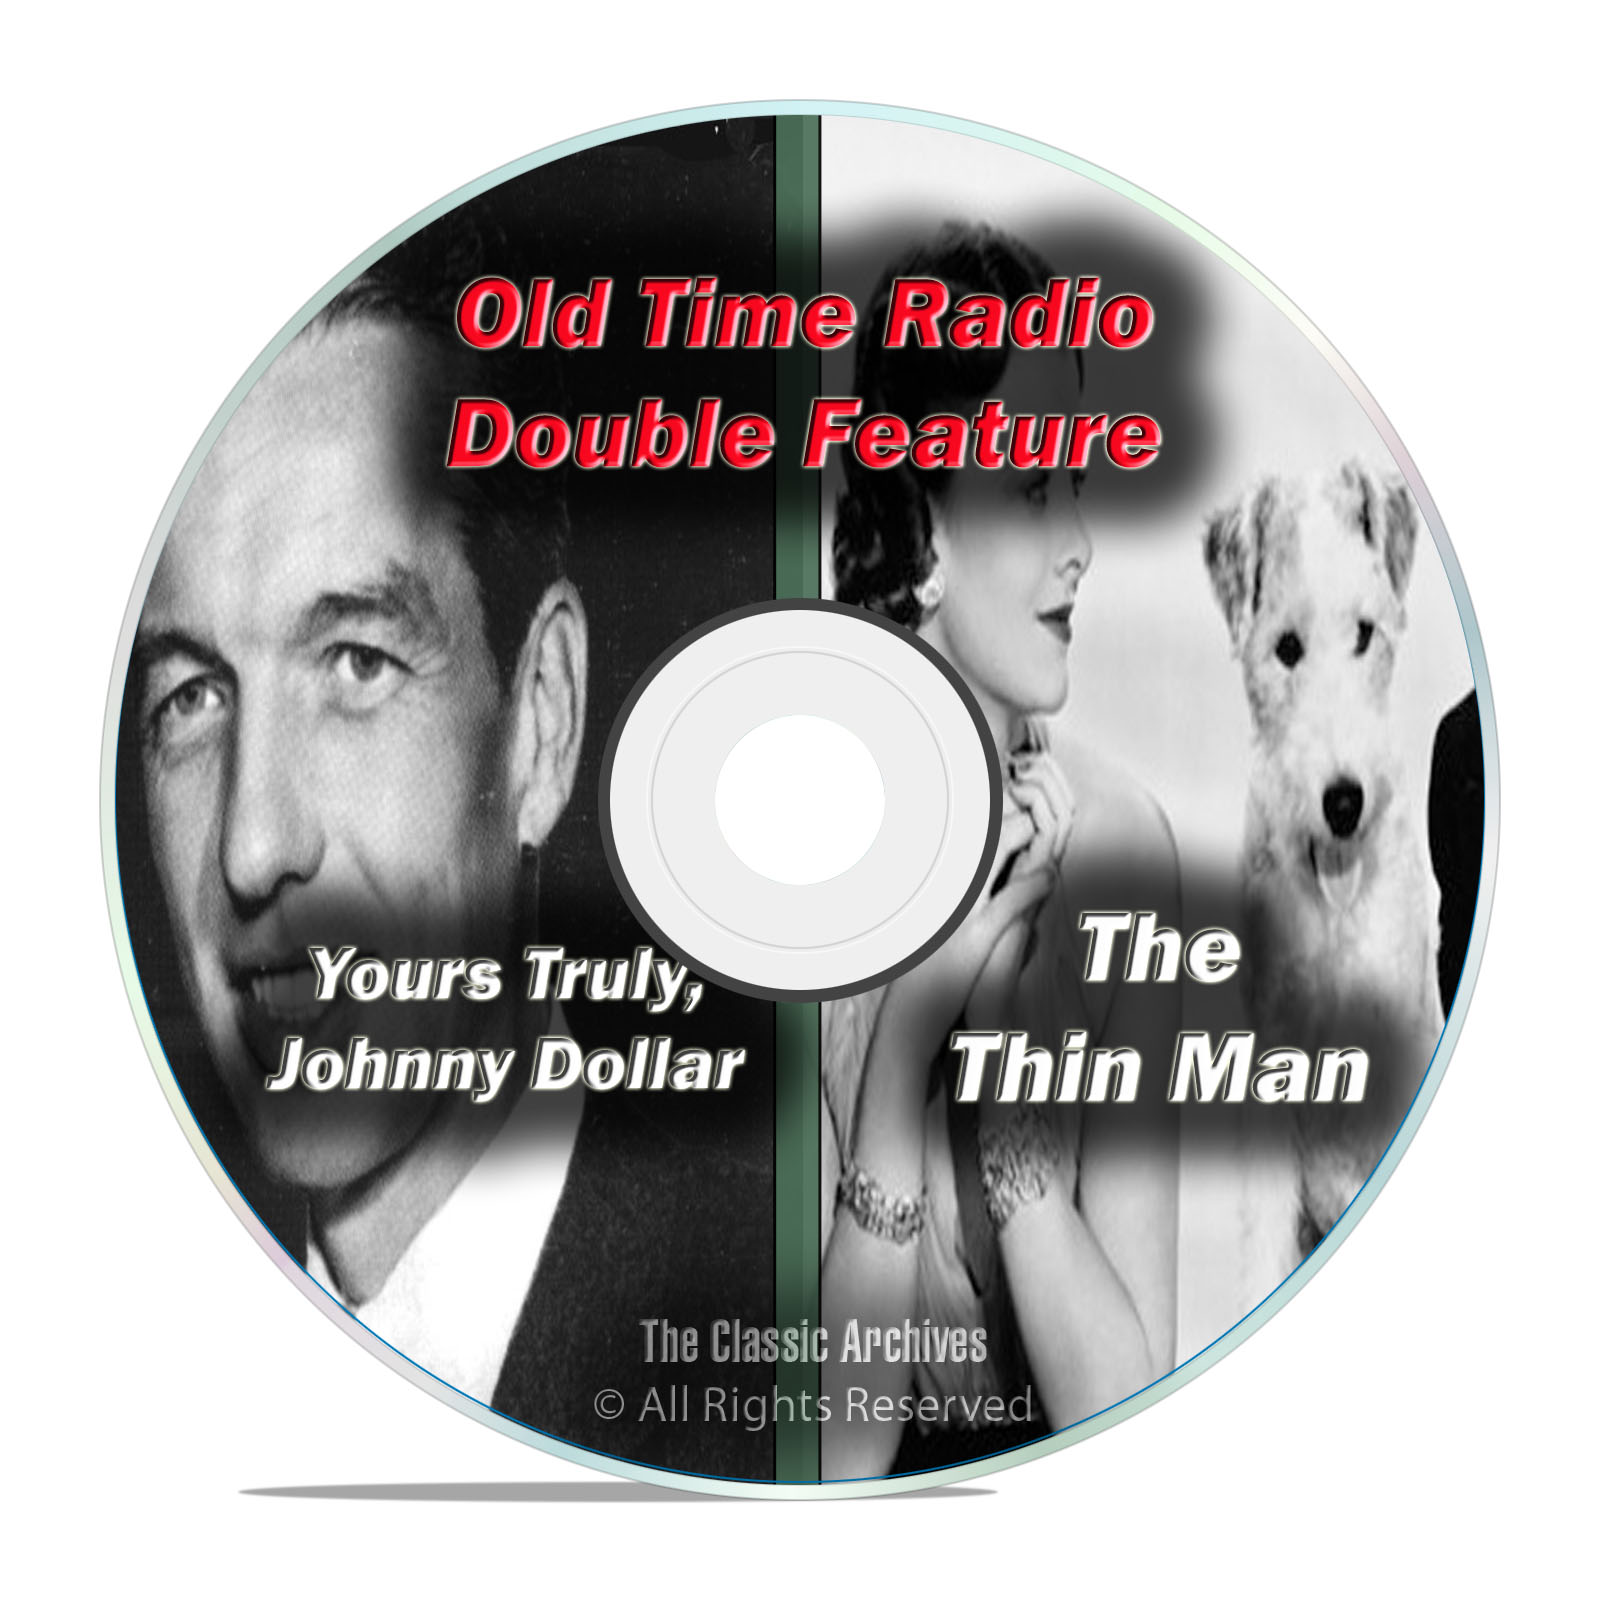 Yours Truly, Johnny Dollar, The Thin Man, 802 SHOWS Old Time Radio, OTR DVD